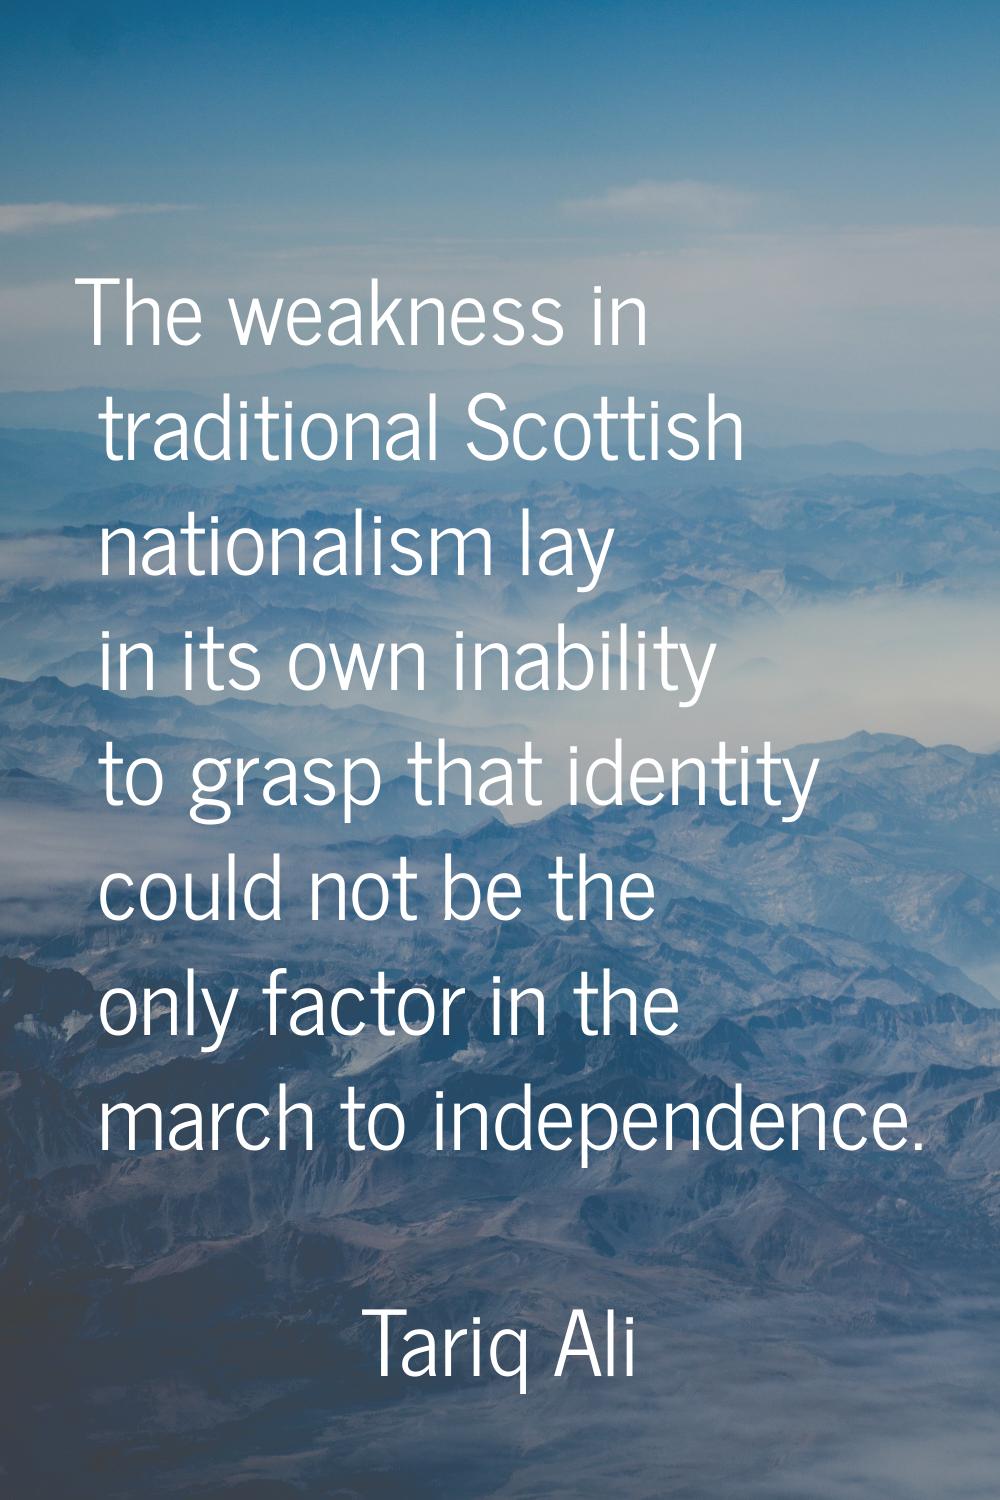 The weakness in traditional Scottish nationalism lay in its own inability to grasp that identity co